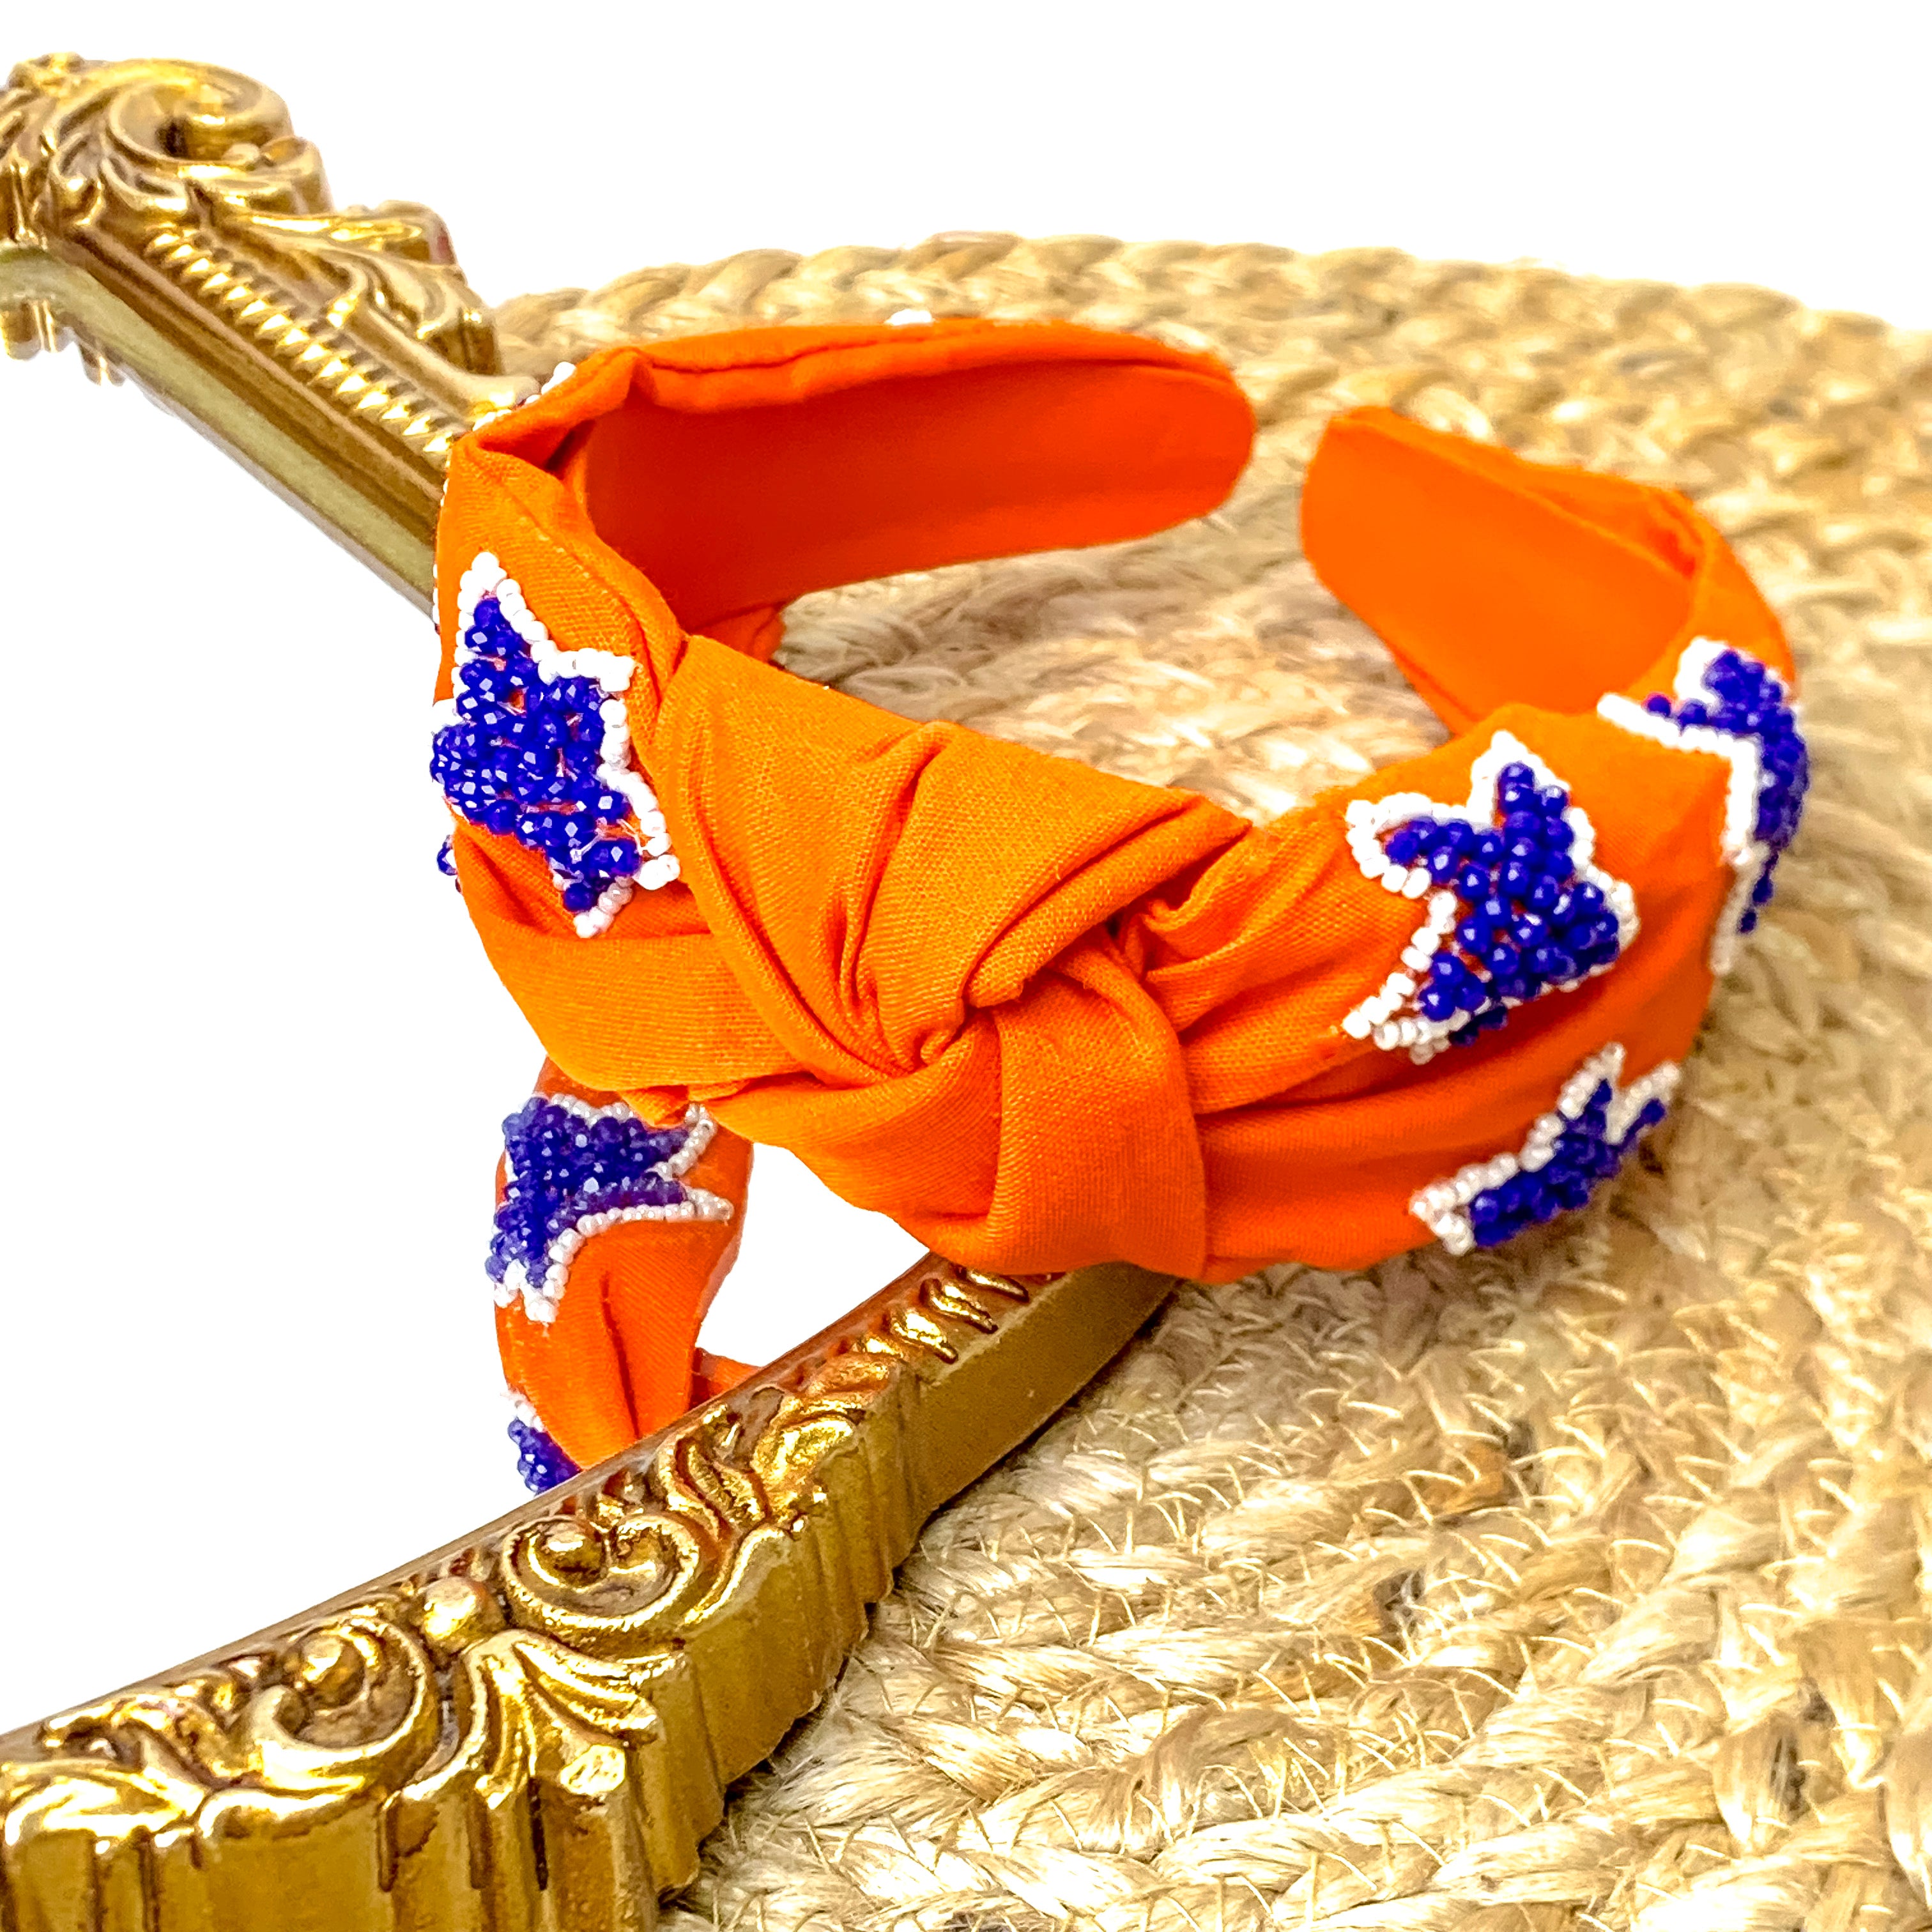 Team Spirit Orange Knot Headband with Navy Blue and White Seed Bead Stars - Giddy Up Glamour Boutique